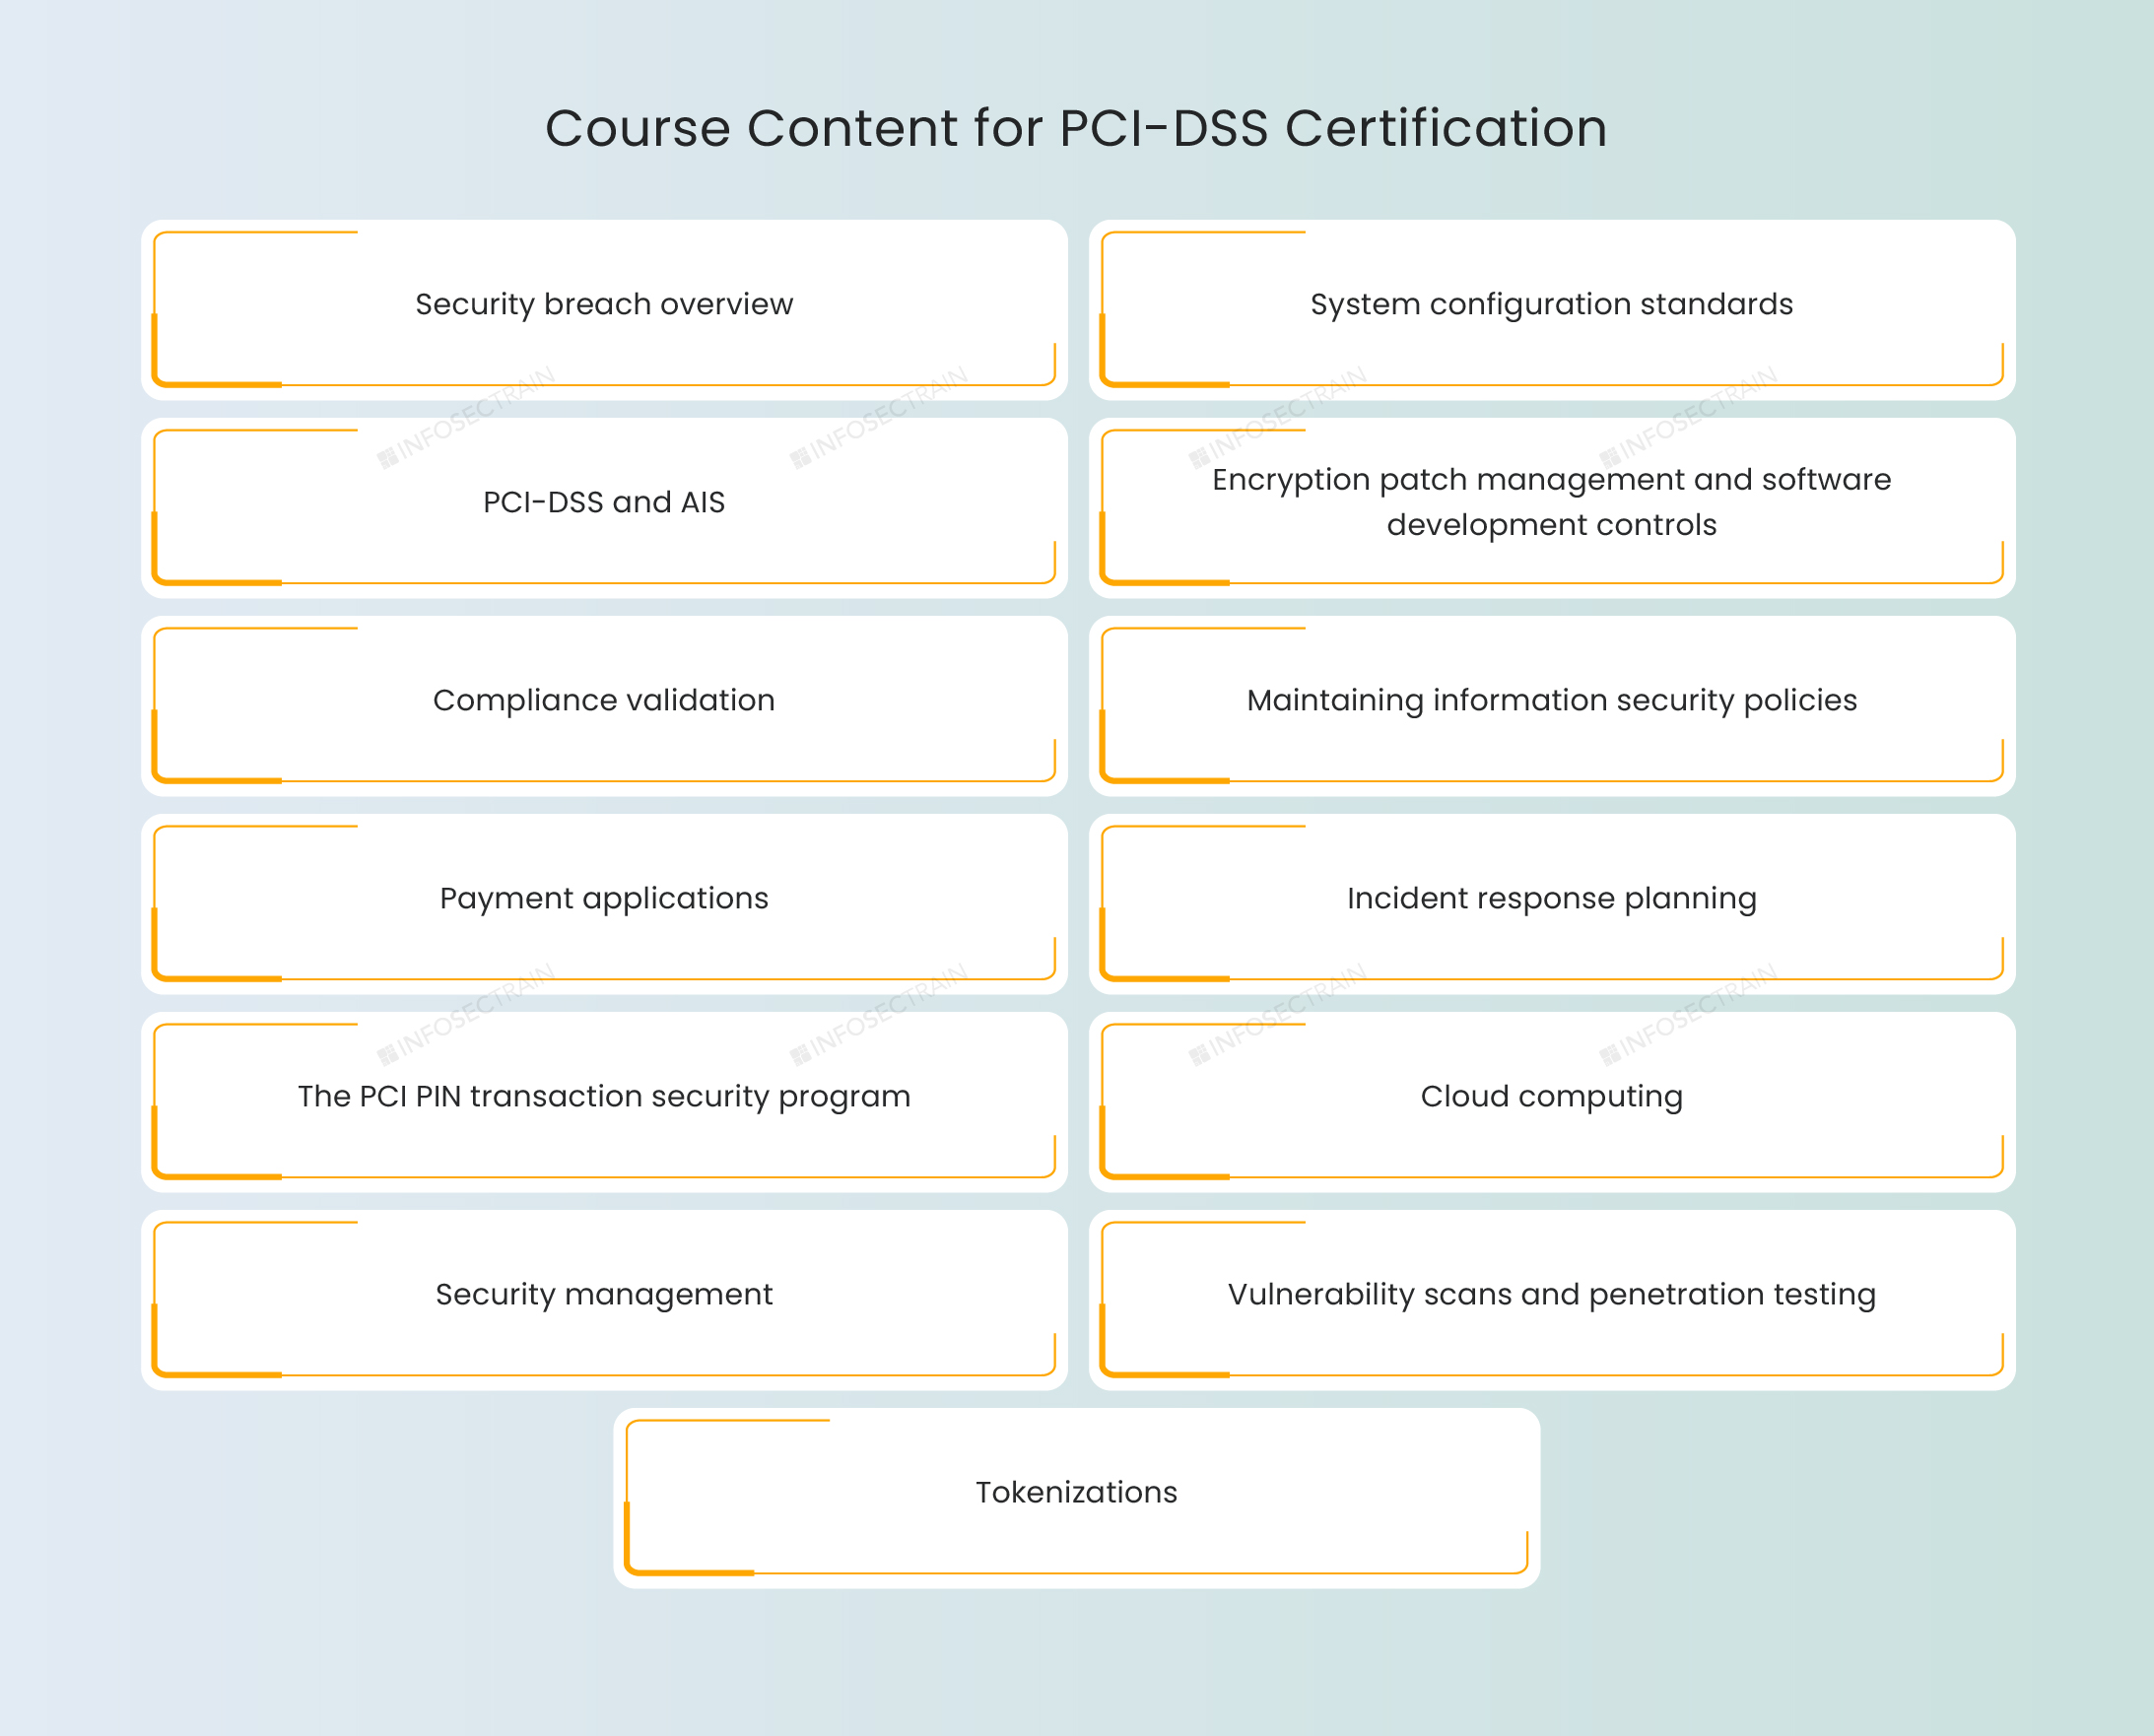 Course Content for PCI-DSS Certification